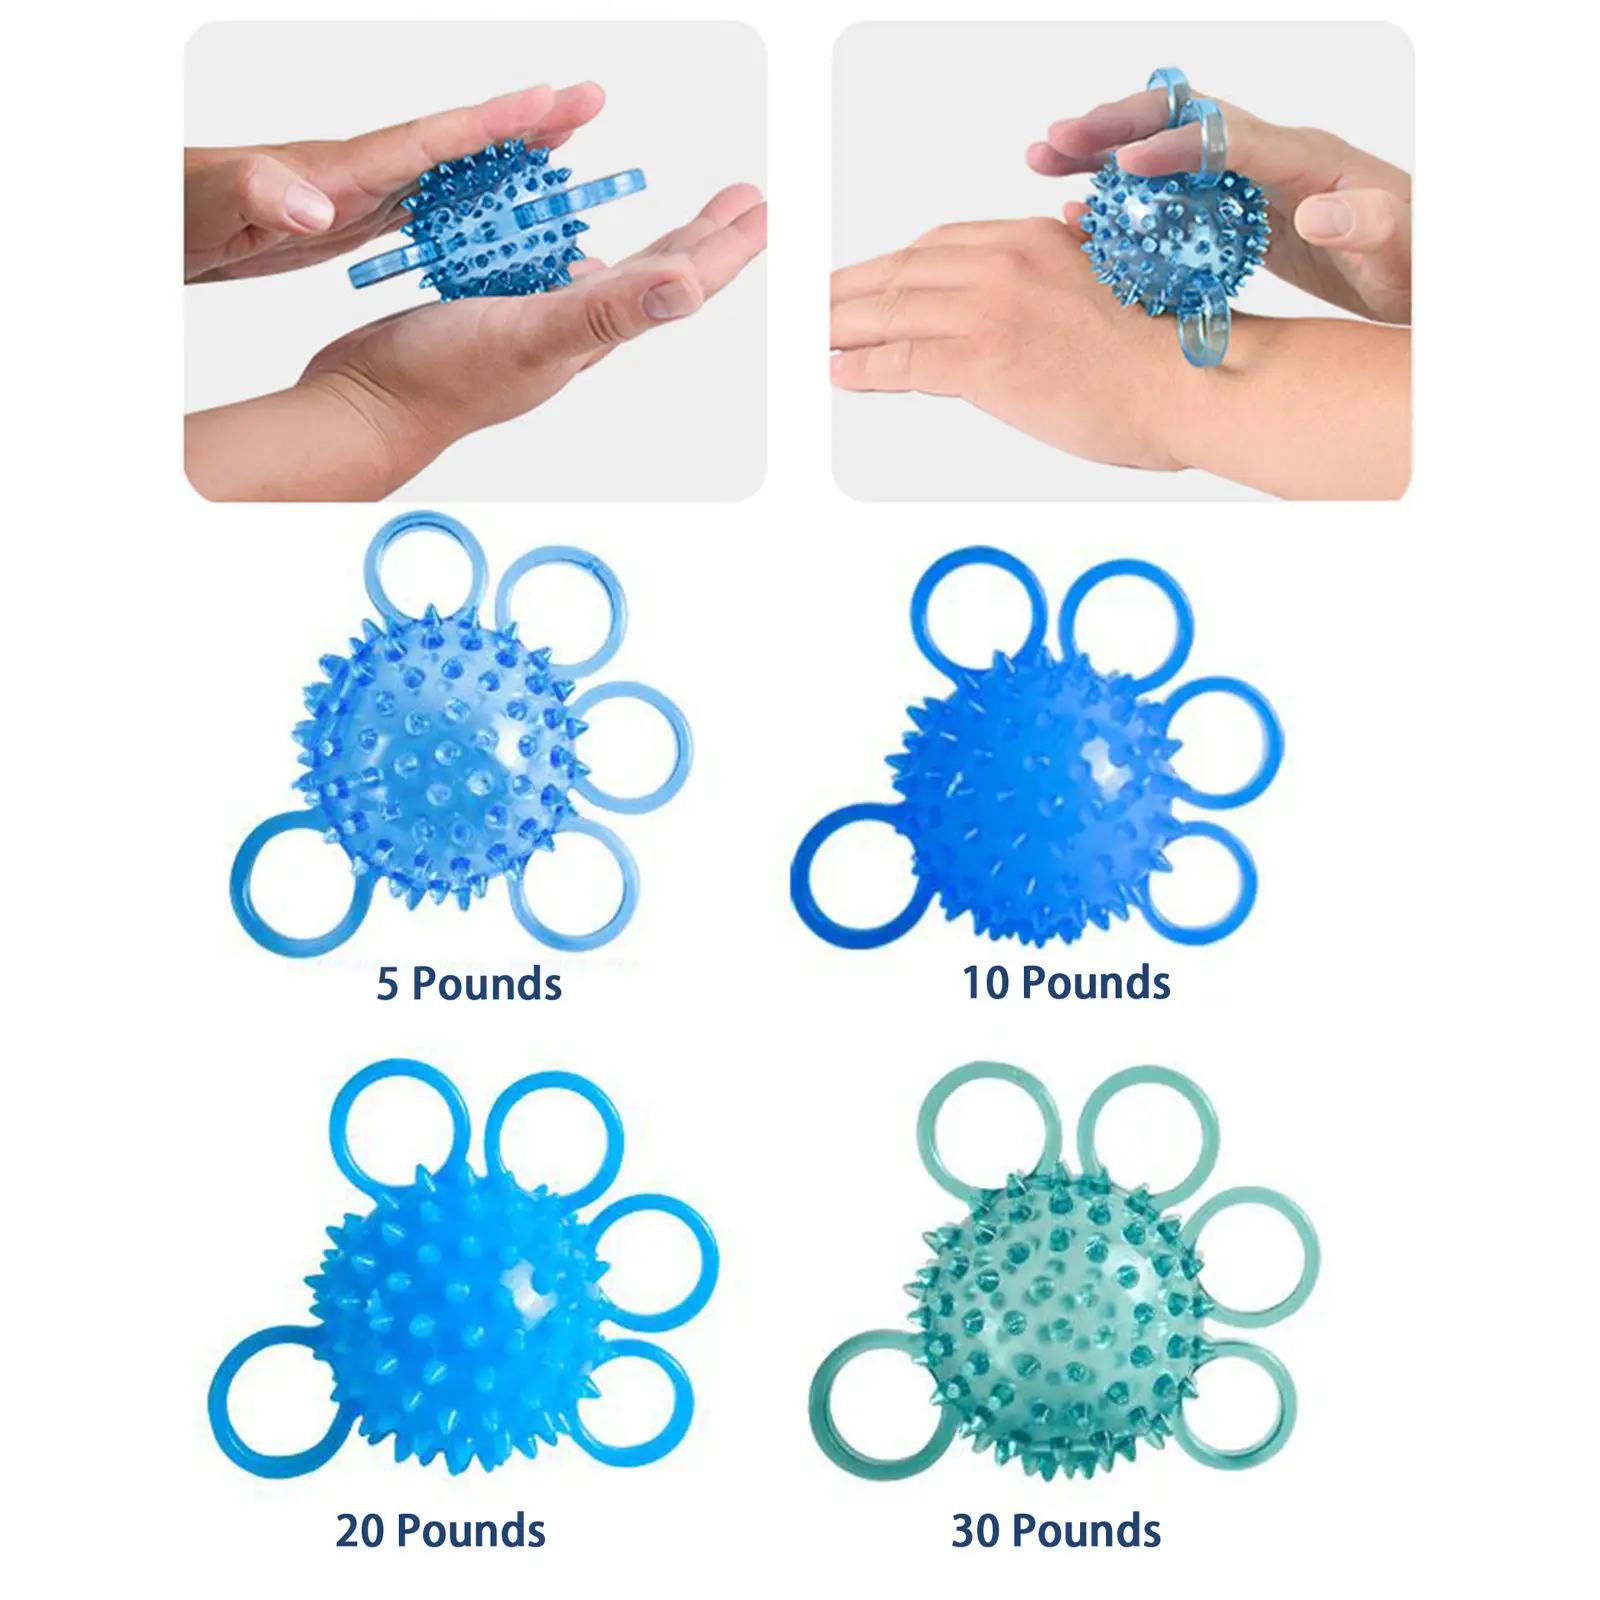 Hand Grip Ball Five Finger Strength Exerciser Force Training Relieve Recovery Stress Relief Ostomy for Hemiplegia Adults Elderly